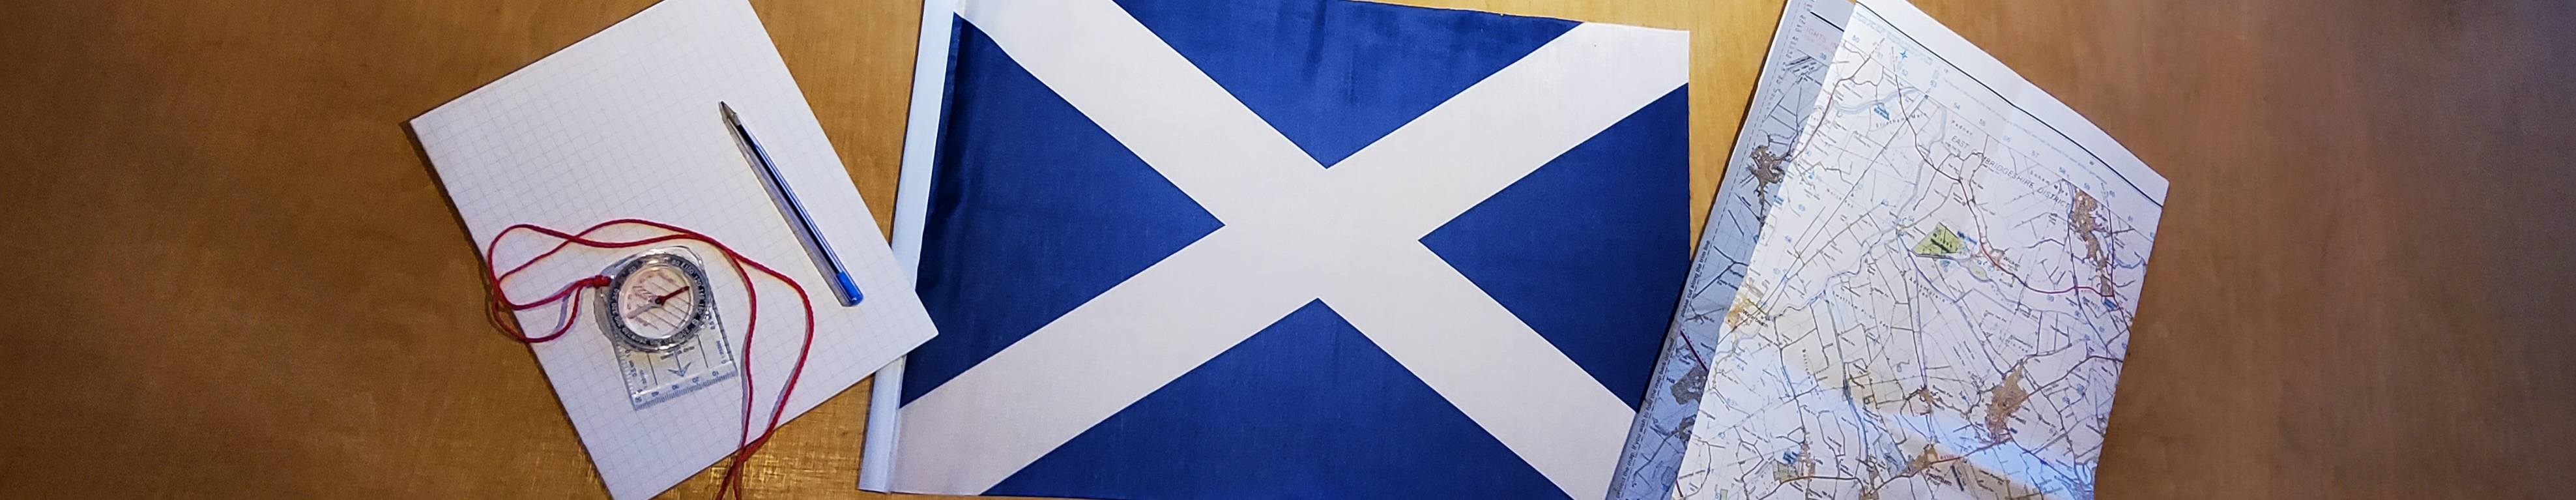 Scotland flag with map and compass